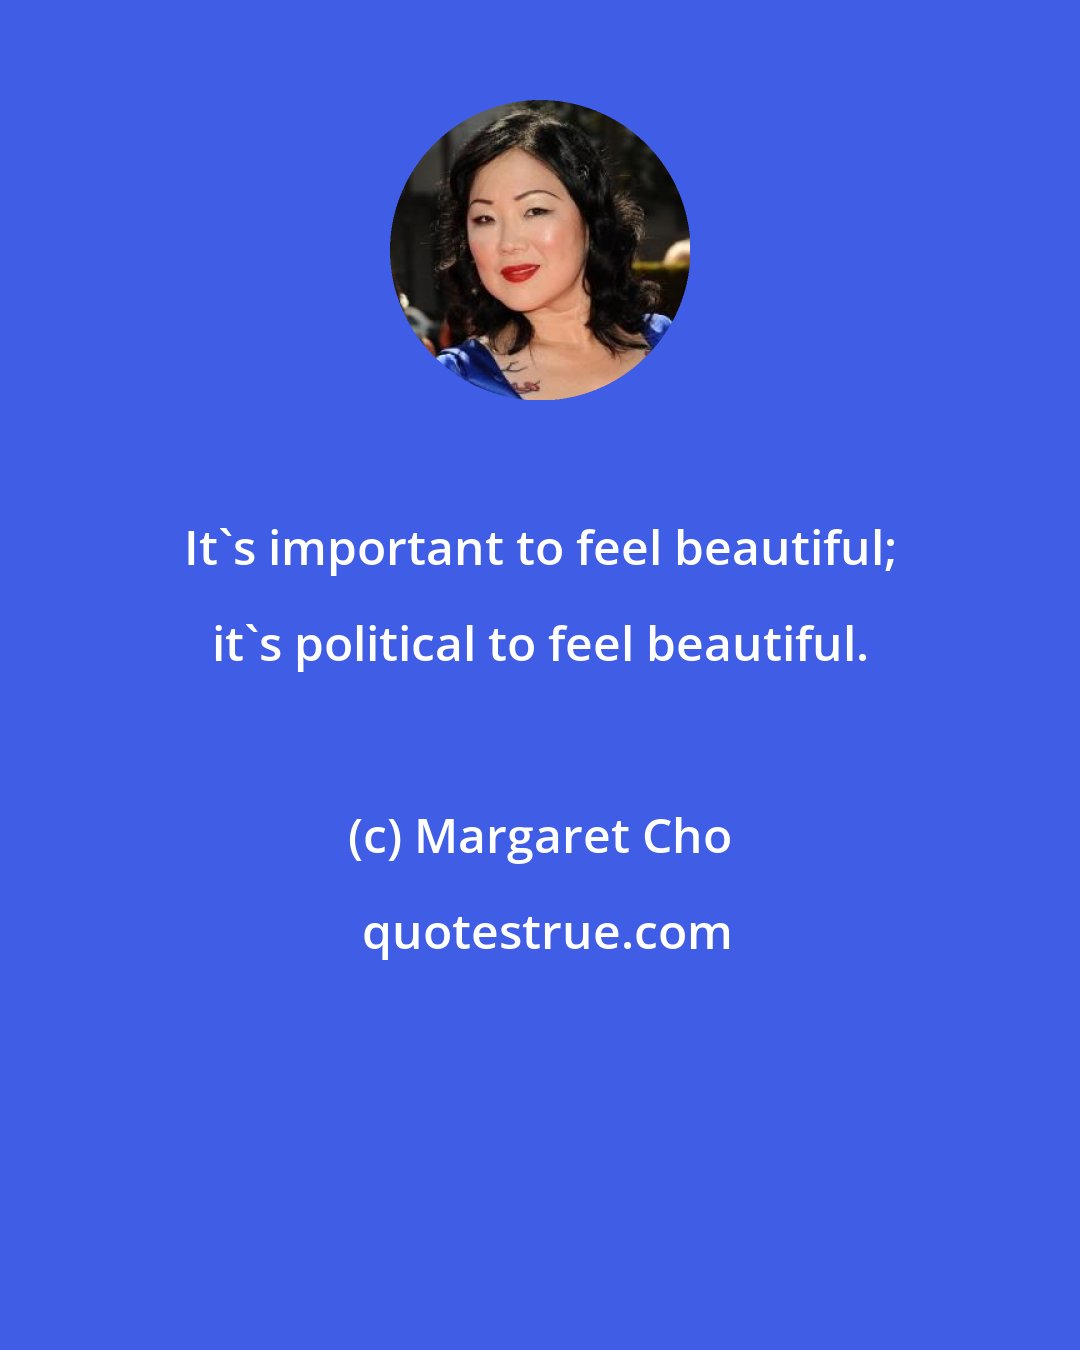 Margaret Cho: It's important to feel beautiful; it's political to feel beautiful.